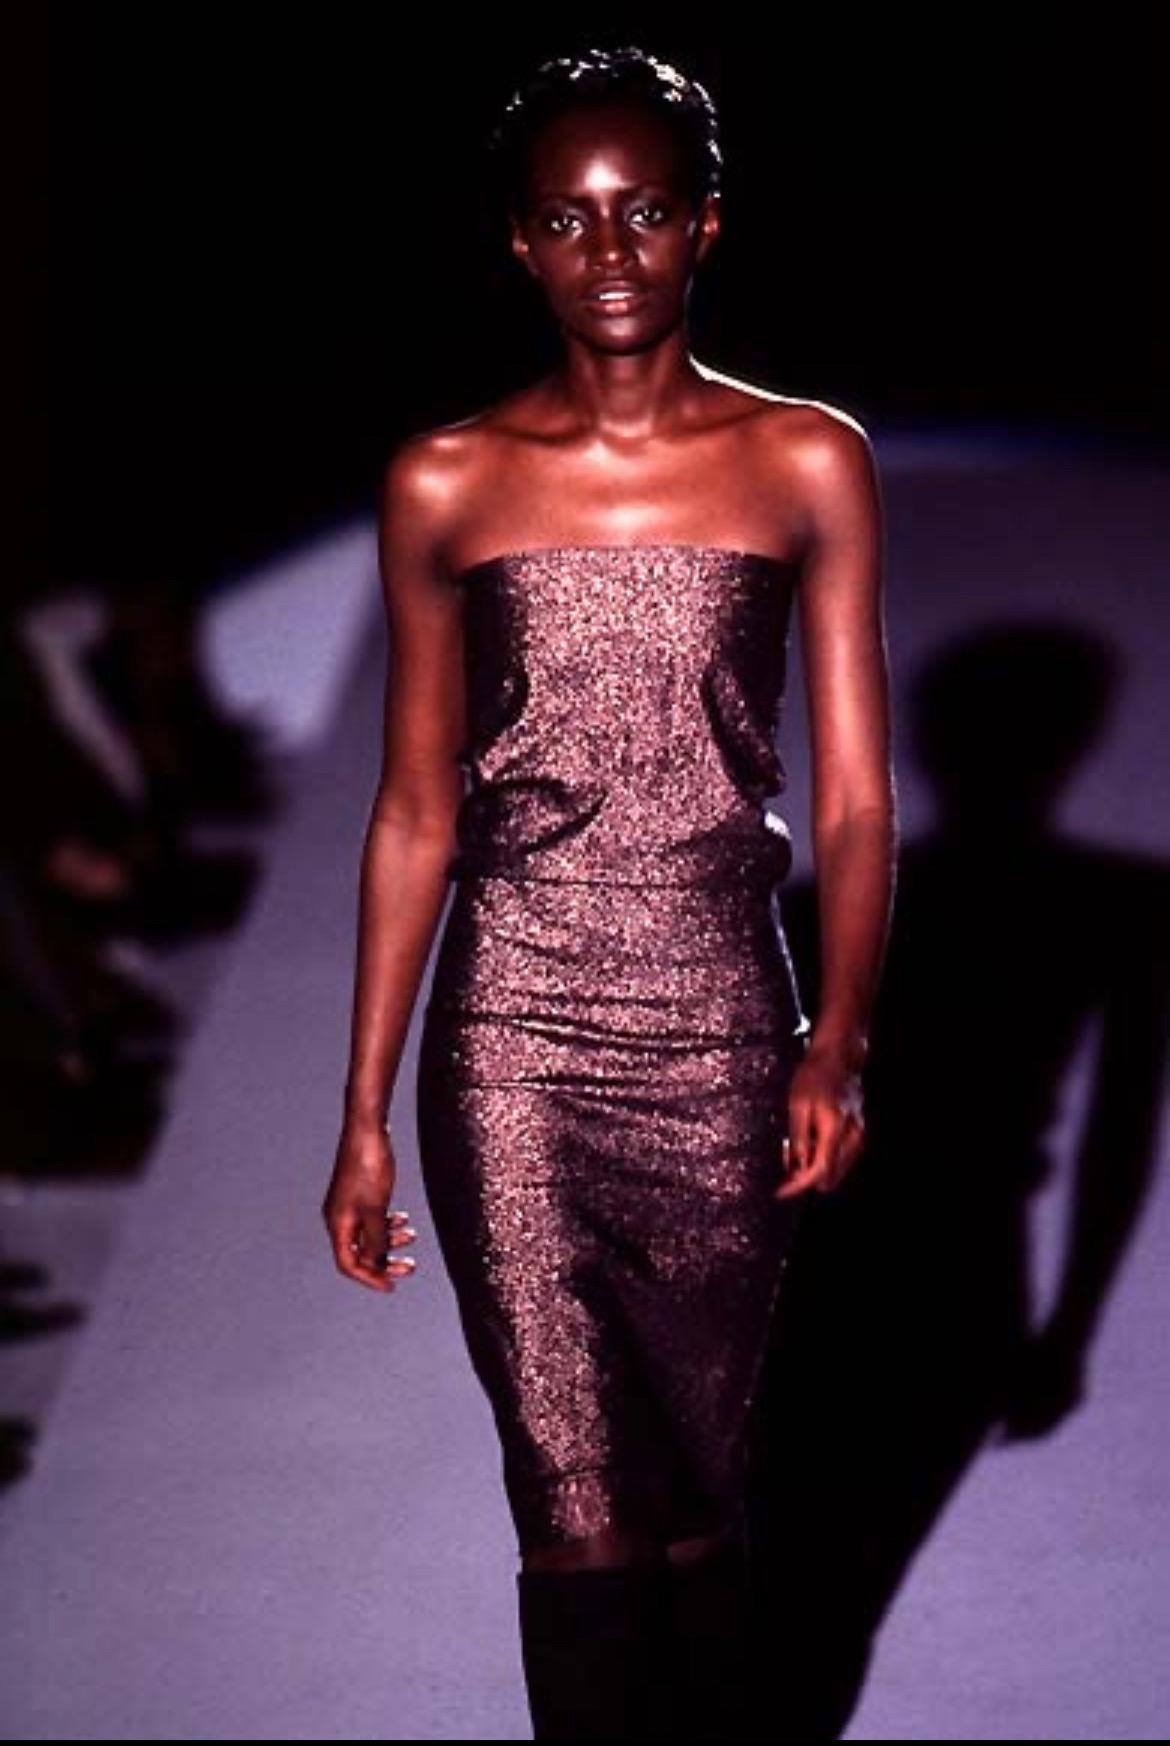 Presenting a dark brown metallic Gucci tube dress, designed by Tom Ford. This dress debuted on the Spring/Summer 1997 runway presentation on Kiara Kabukuru. Make this dress your own by styling it with a gathered look at the waist or pulled down to